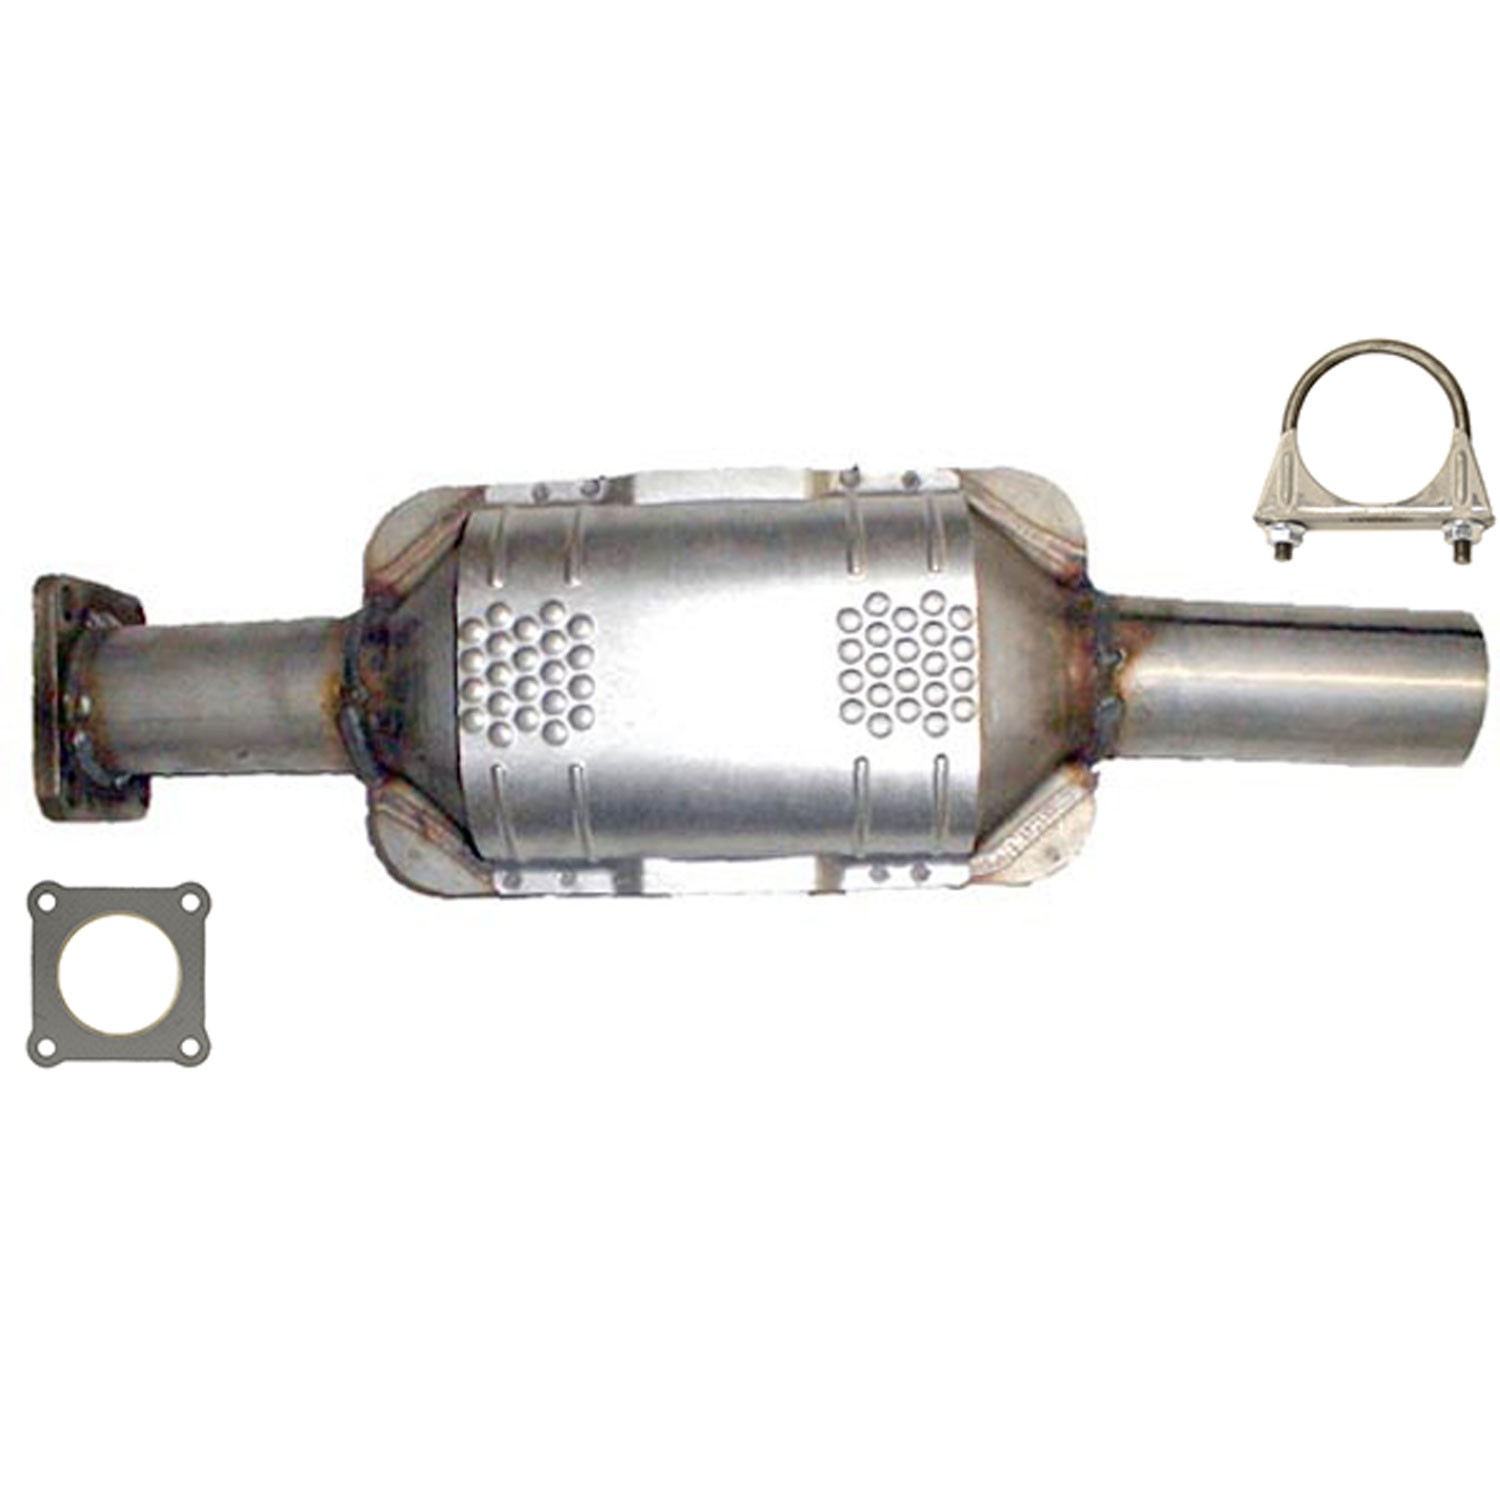 Eastern 10131 Direct Fit Catalytic Converter